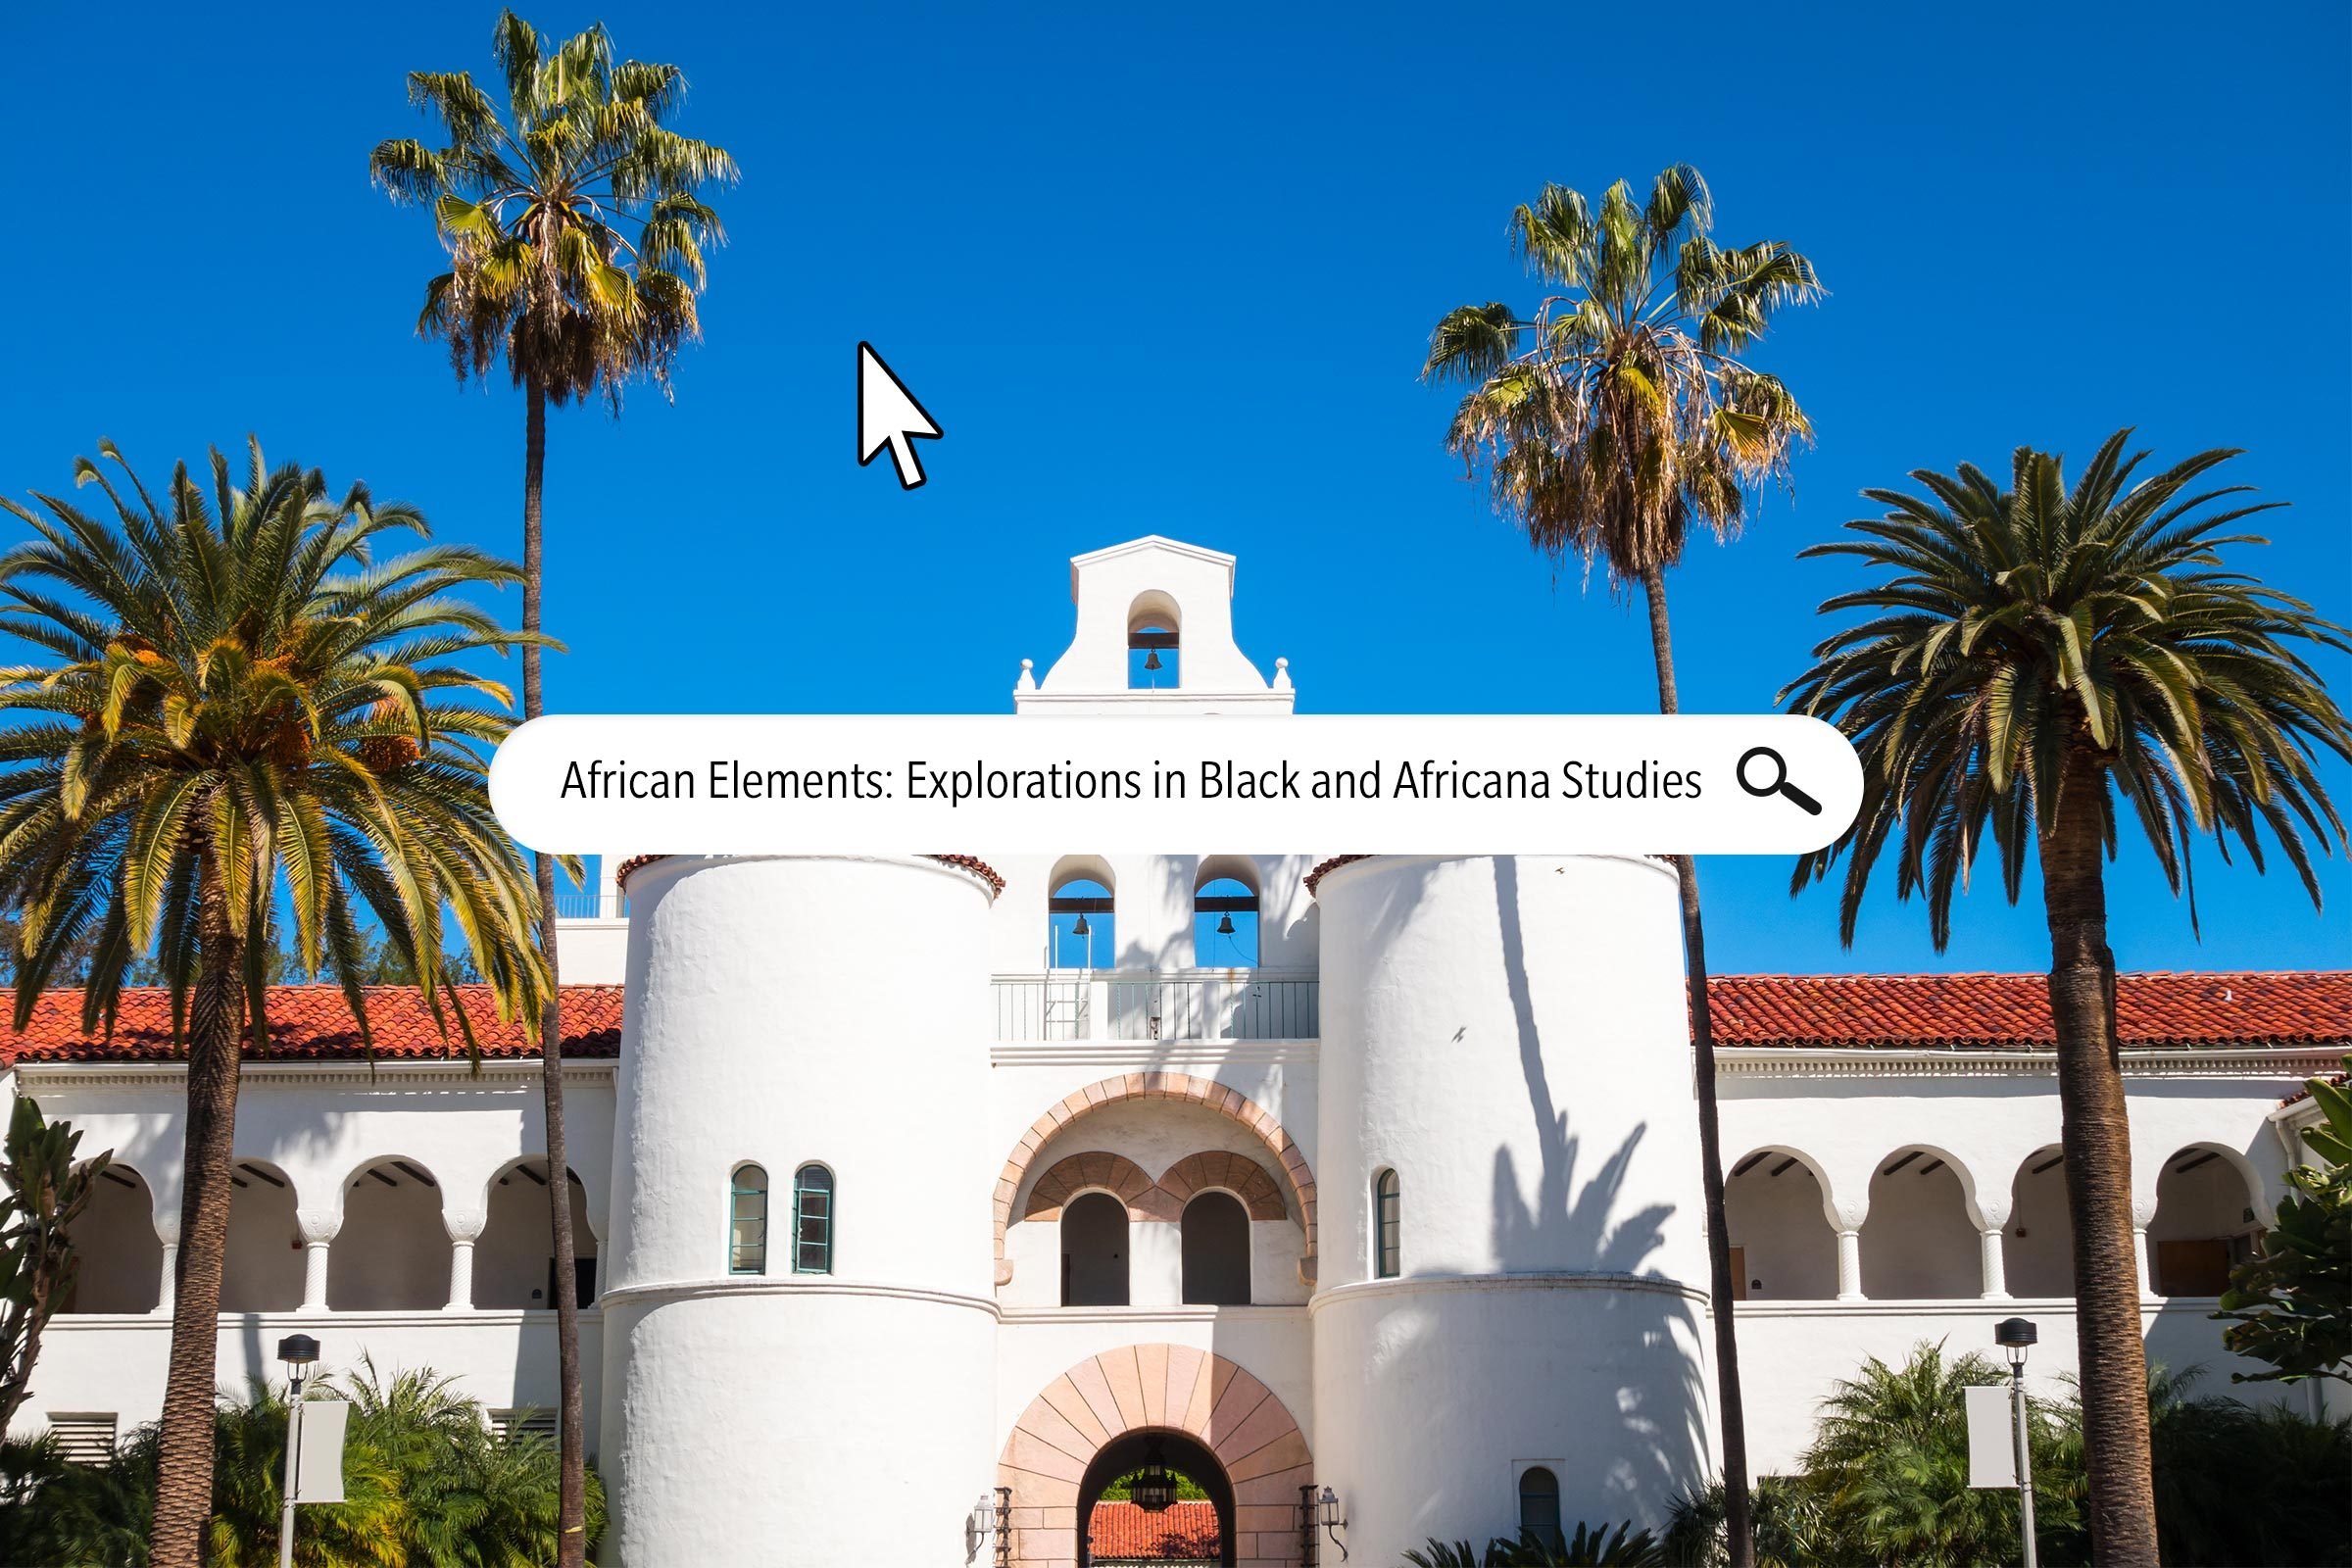 African Elements: Explorations in Black and Africana Studies (San Diego State University)